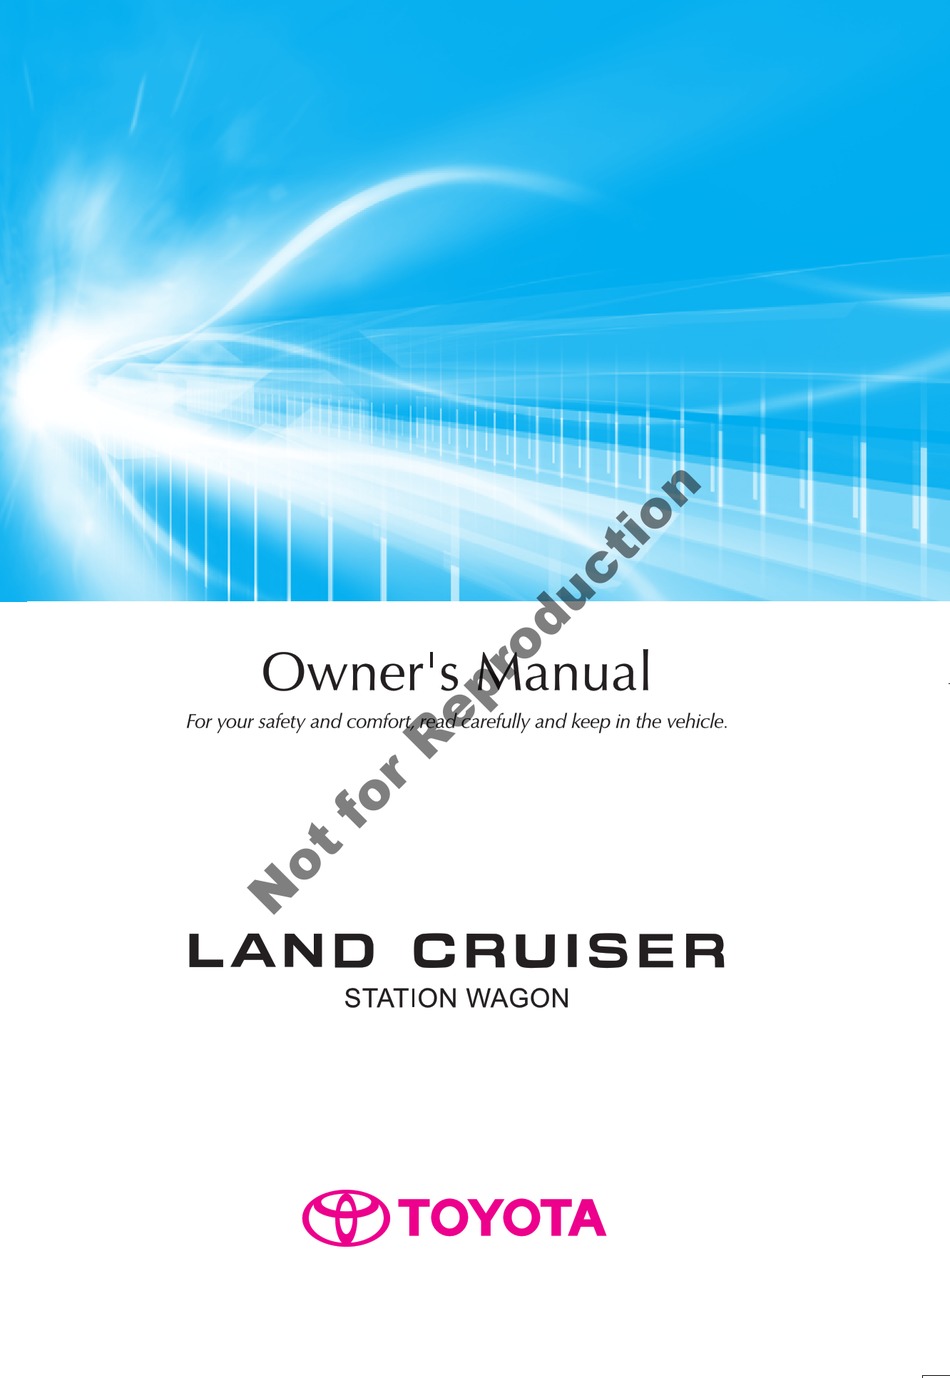 1981 Toyota Land Cruiser Owners Manual User Guide Reference Operator Book Fuses 